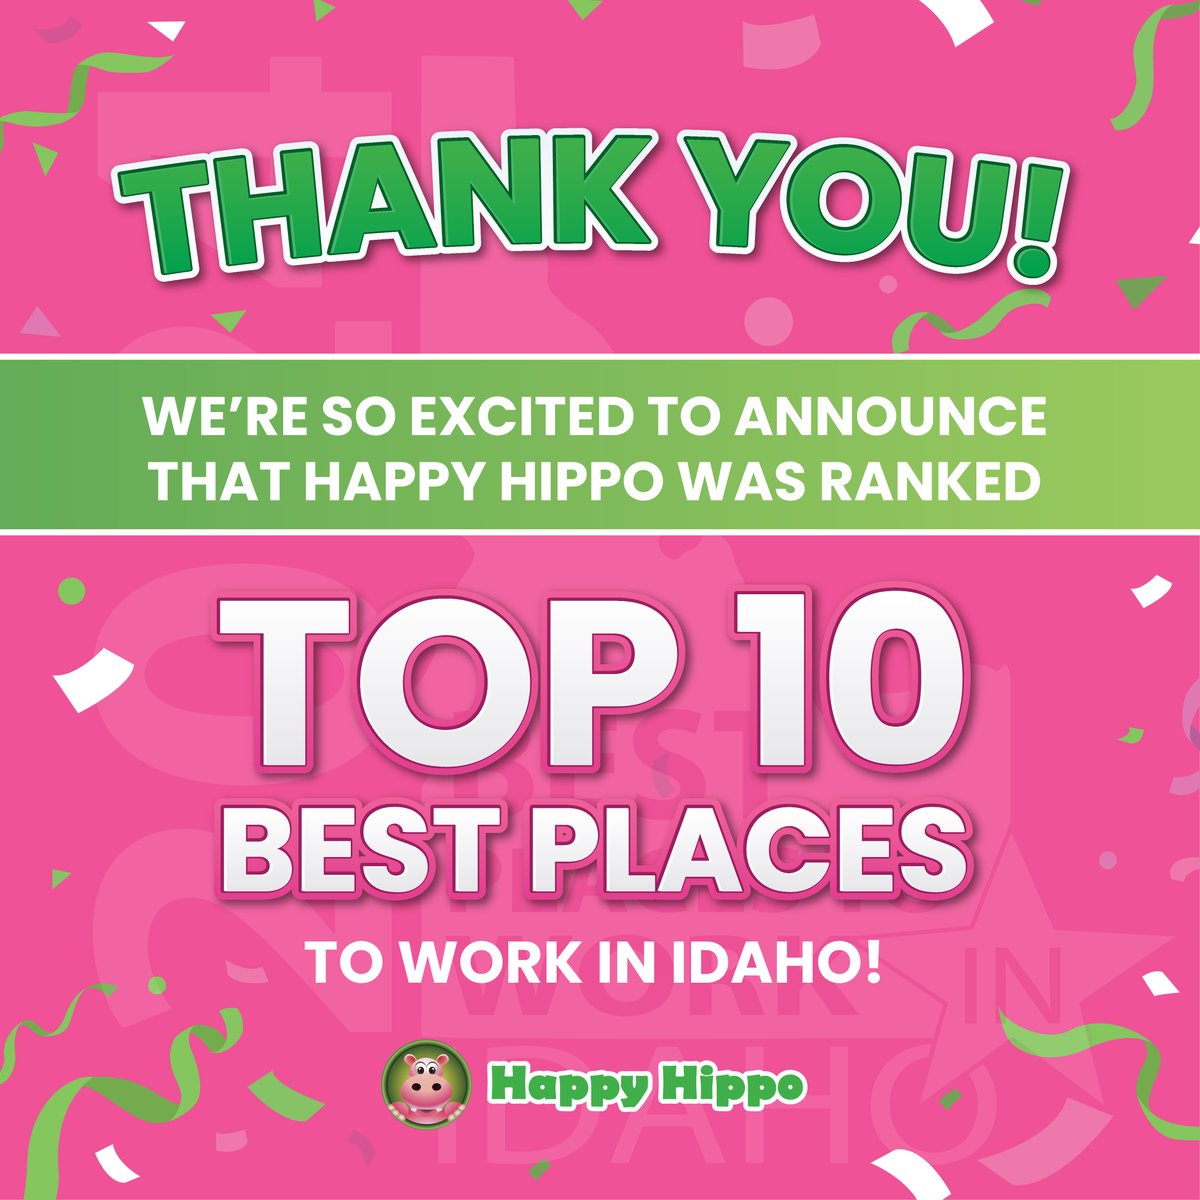 Thrilled and honored to be voted one of the best places to work in Idaho! 🌟 It's all thanks to our amazing team who bring their passion and dedication every day. Here's to creating a workplace where everyone feels valued and supported. 🎉 #BestPlaceToWork #IdahoProud #TeamGoals